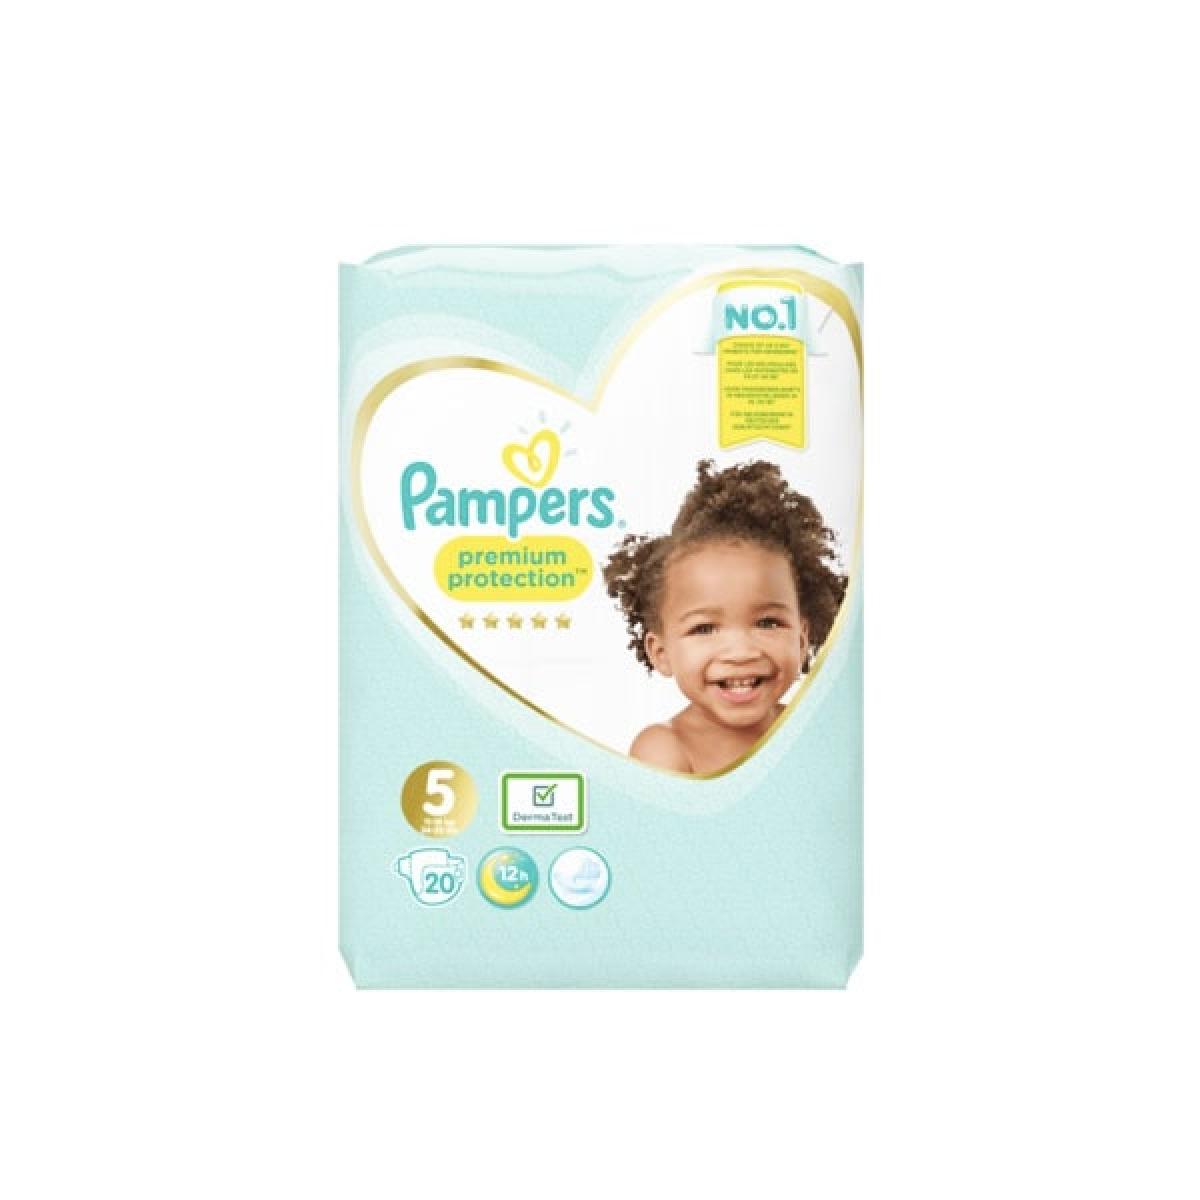 Pampers premium protection taille 0, 20 couches - Pampers